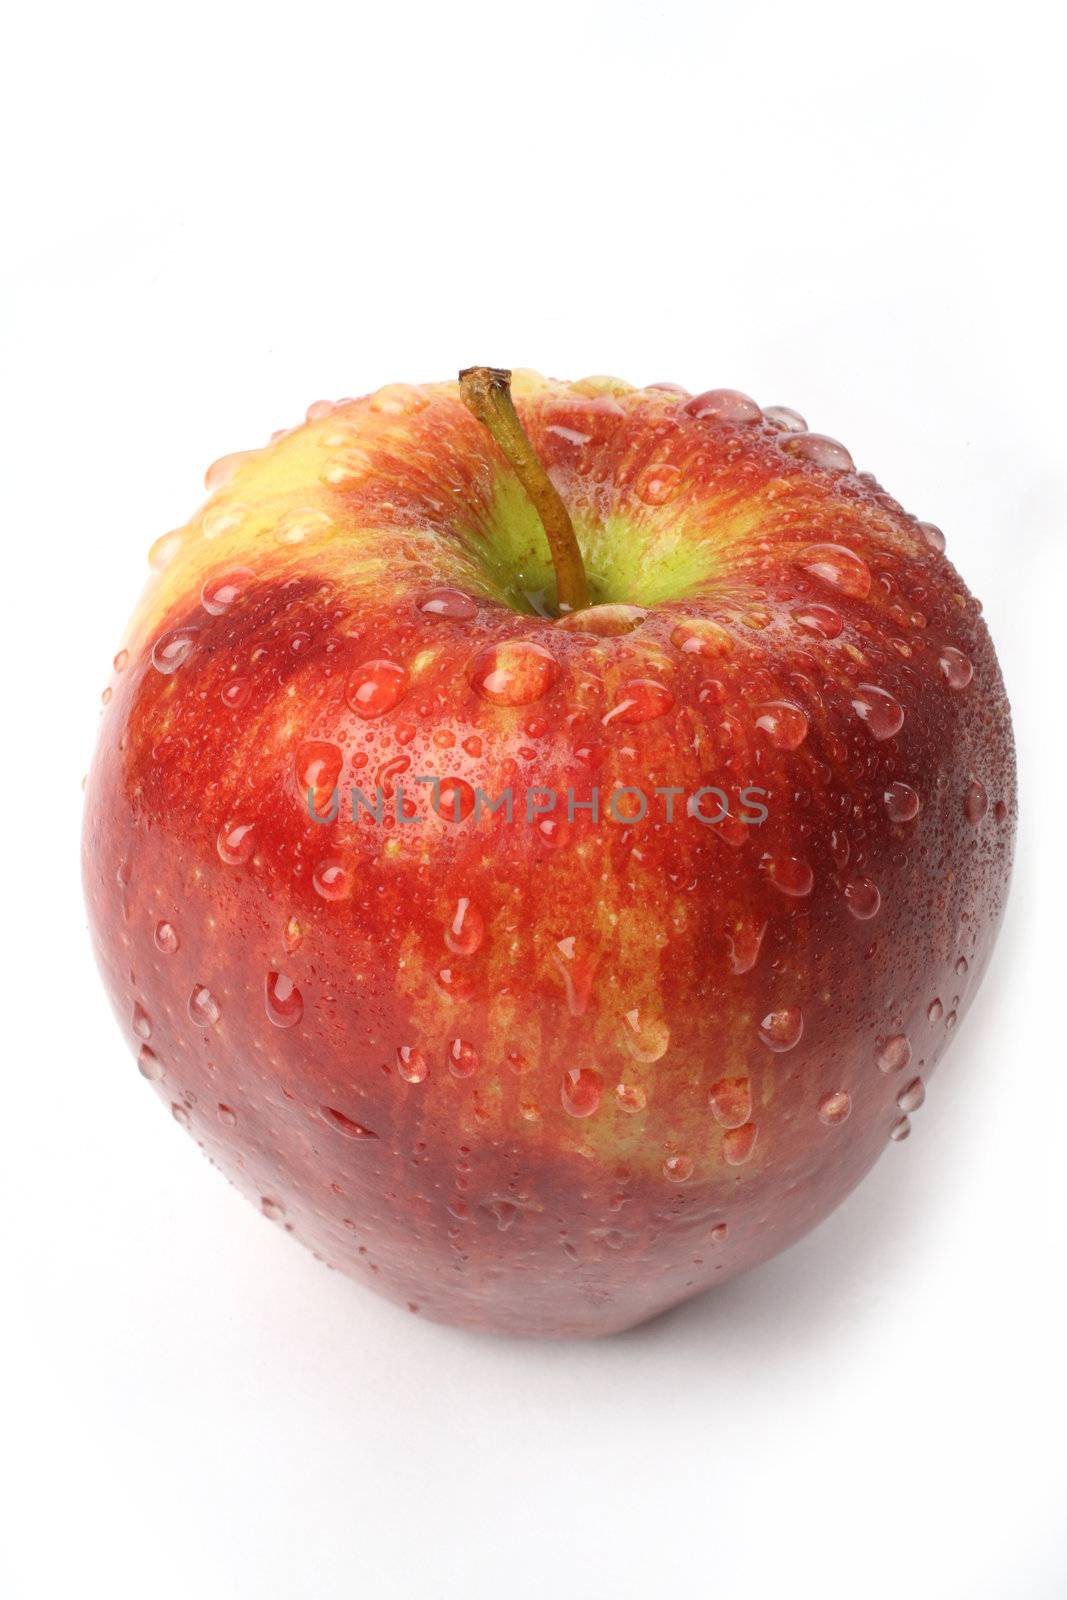 juicy red apple on a white background